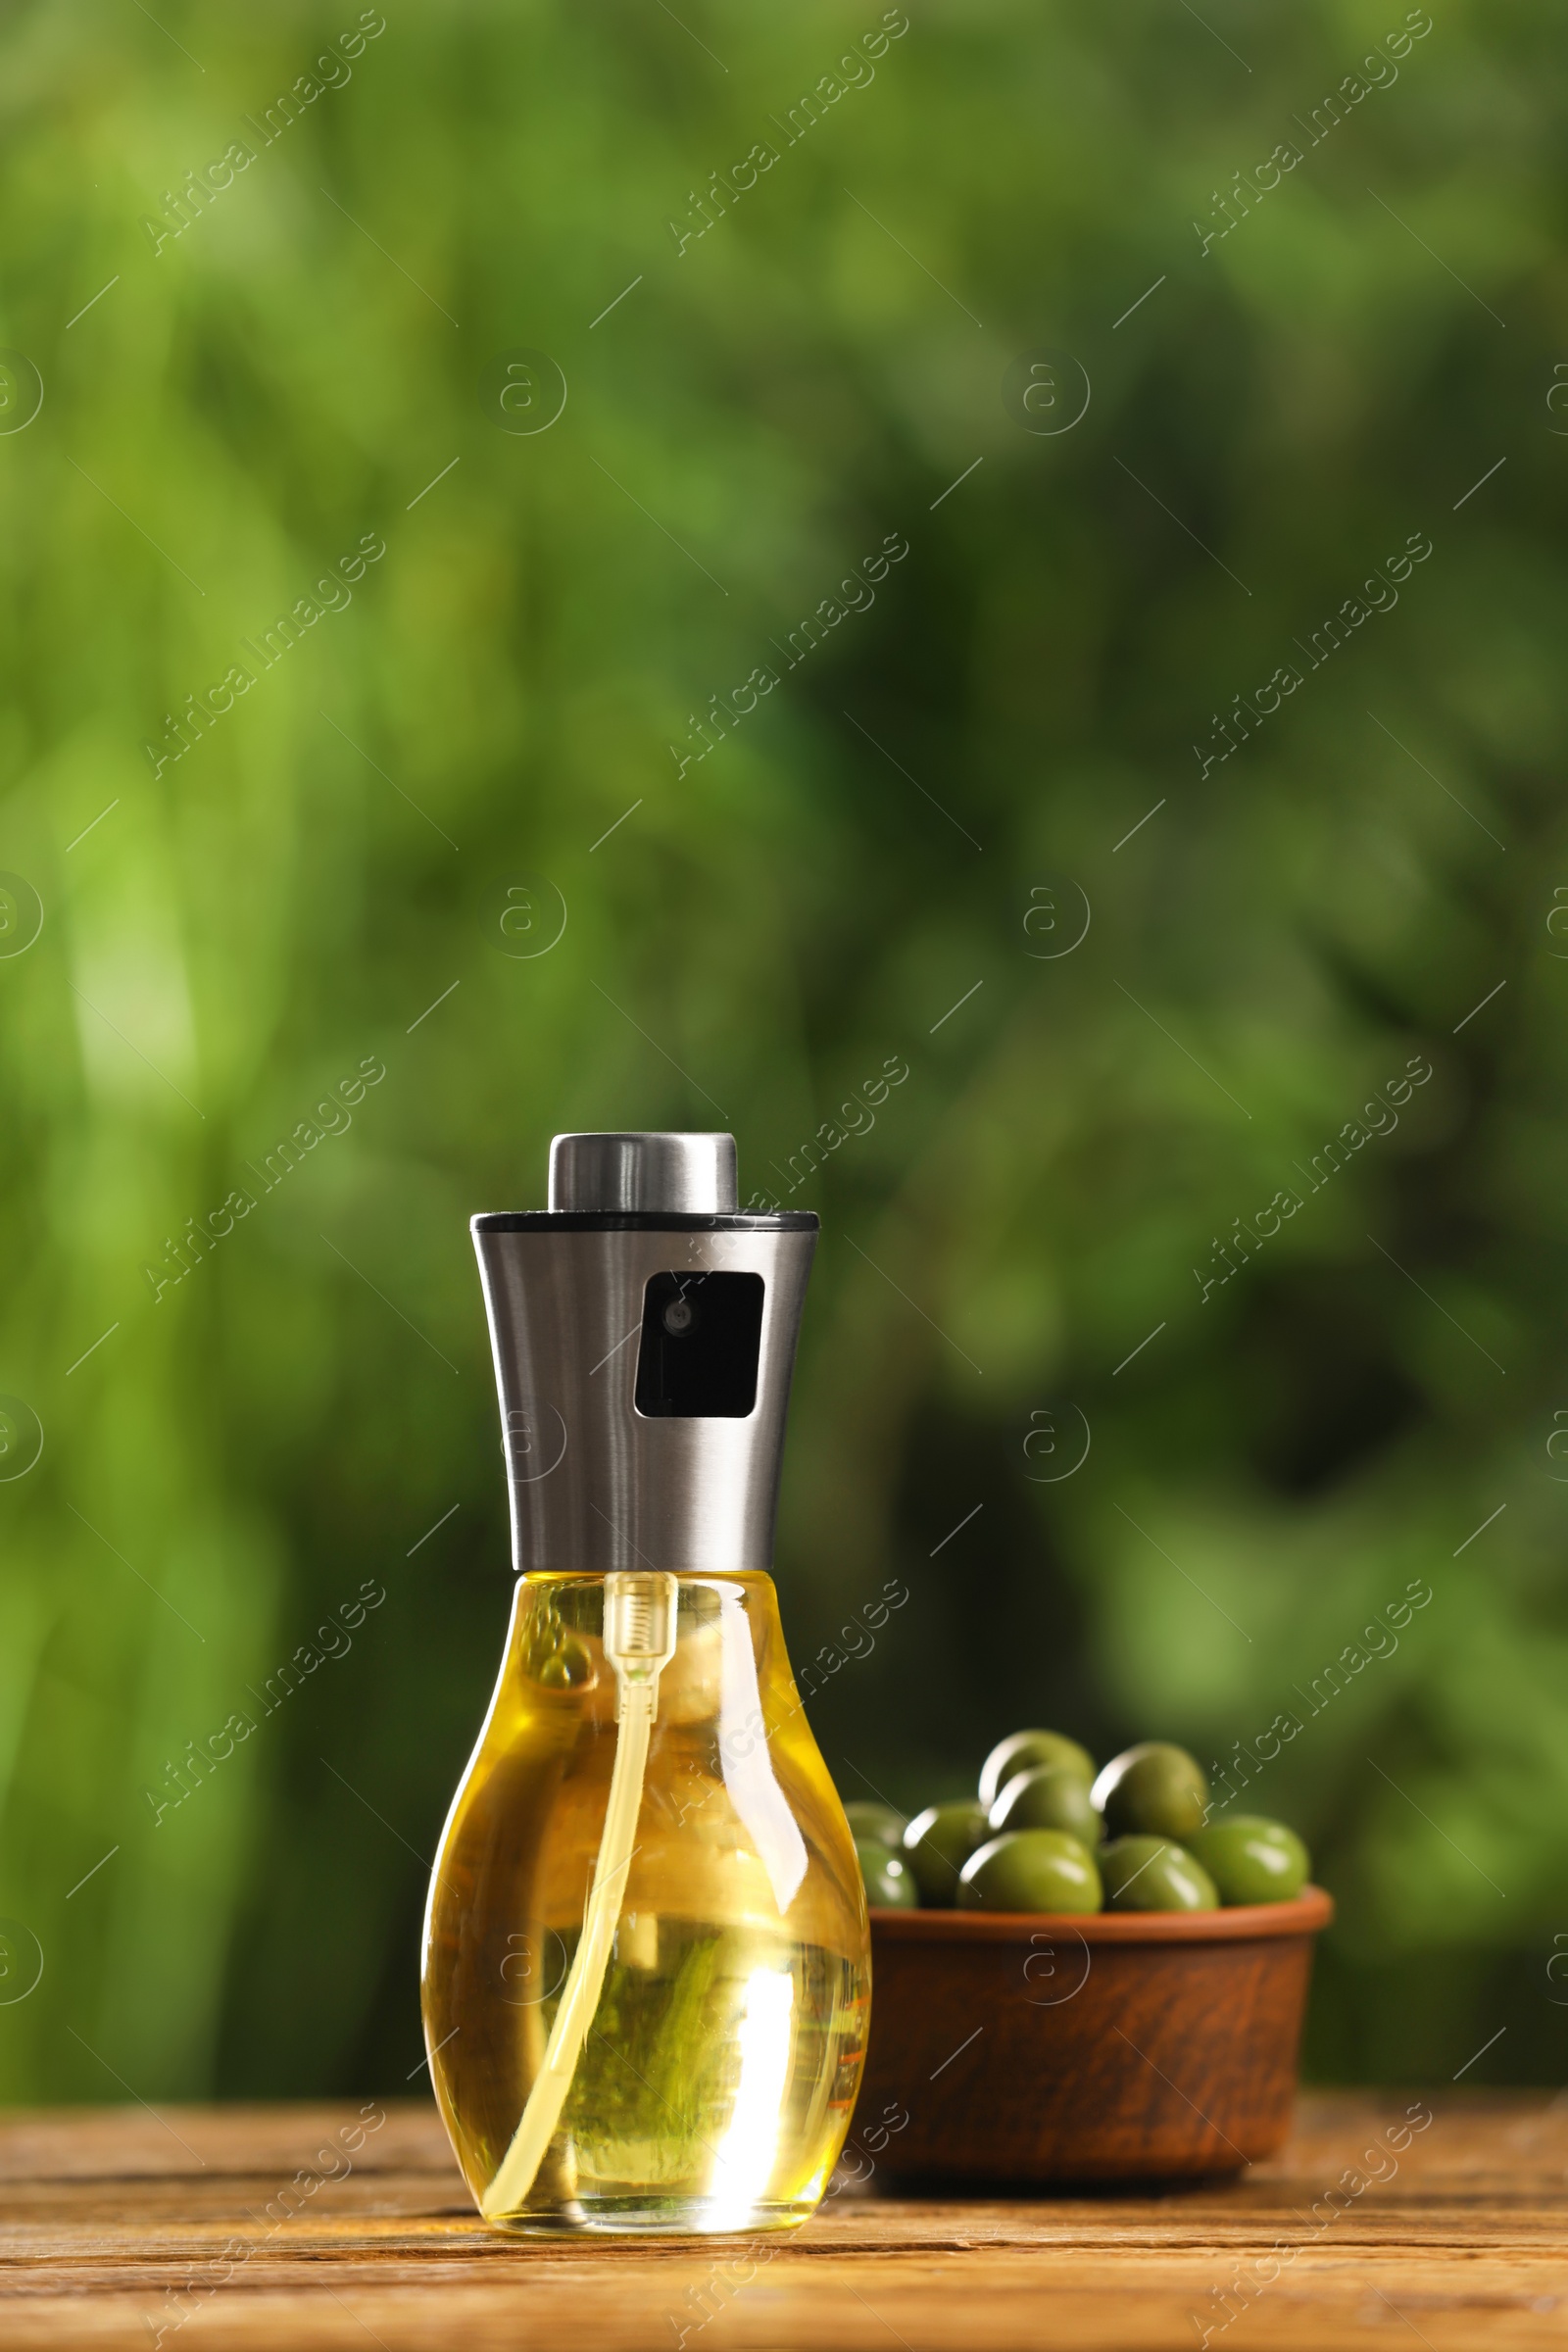 Photo of Spray bottle with cooking oil and olives on wooden table against blurred background